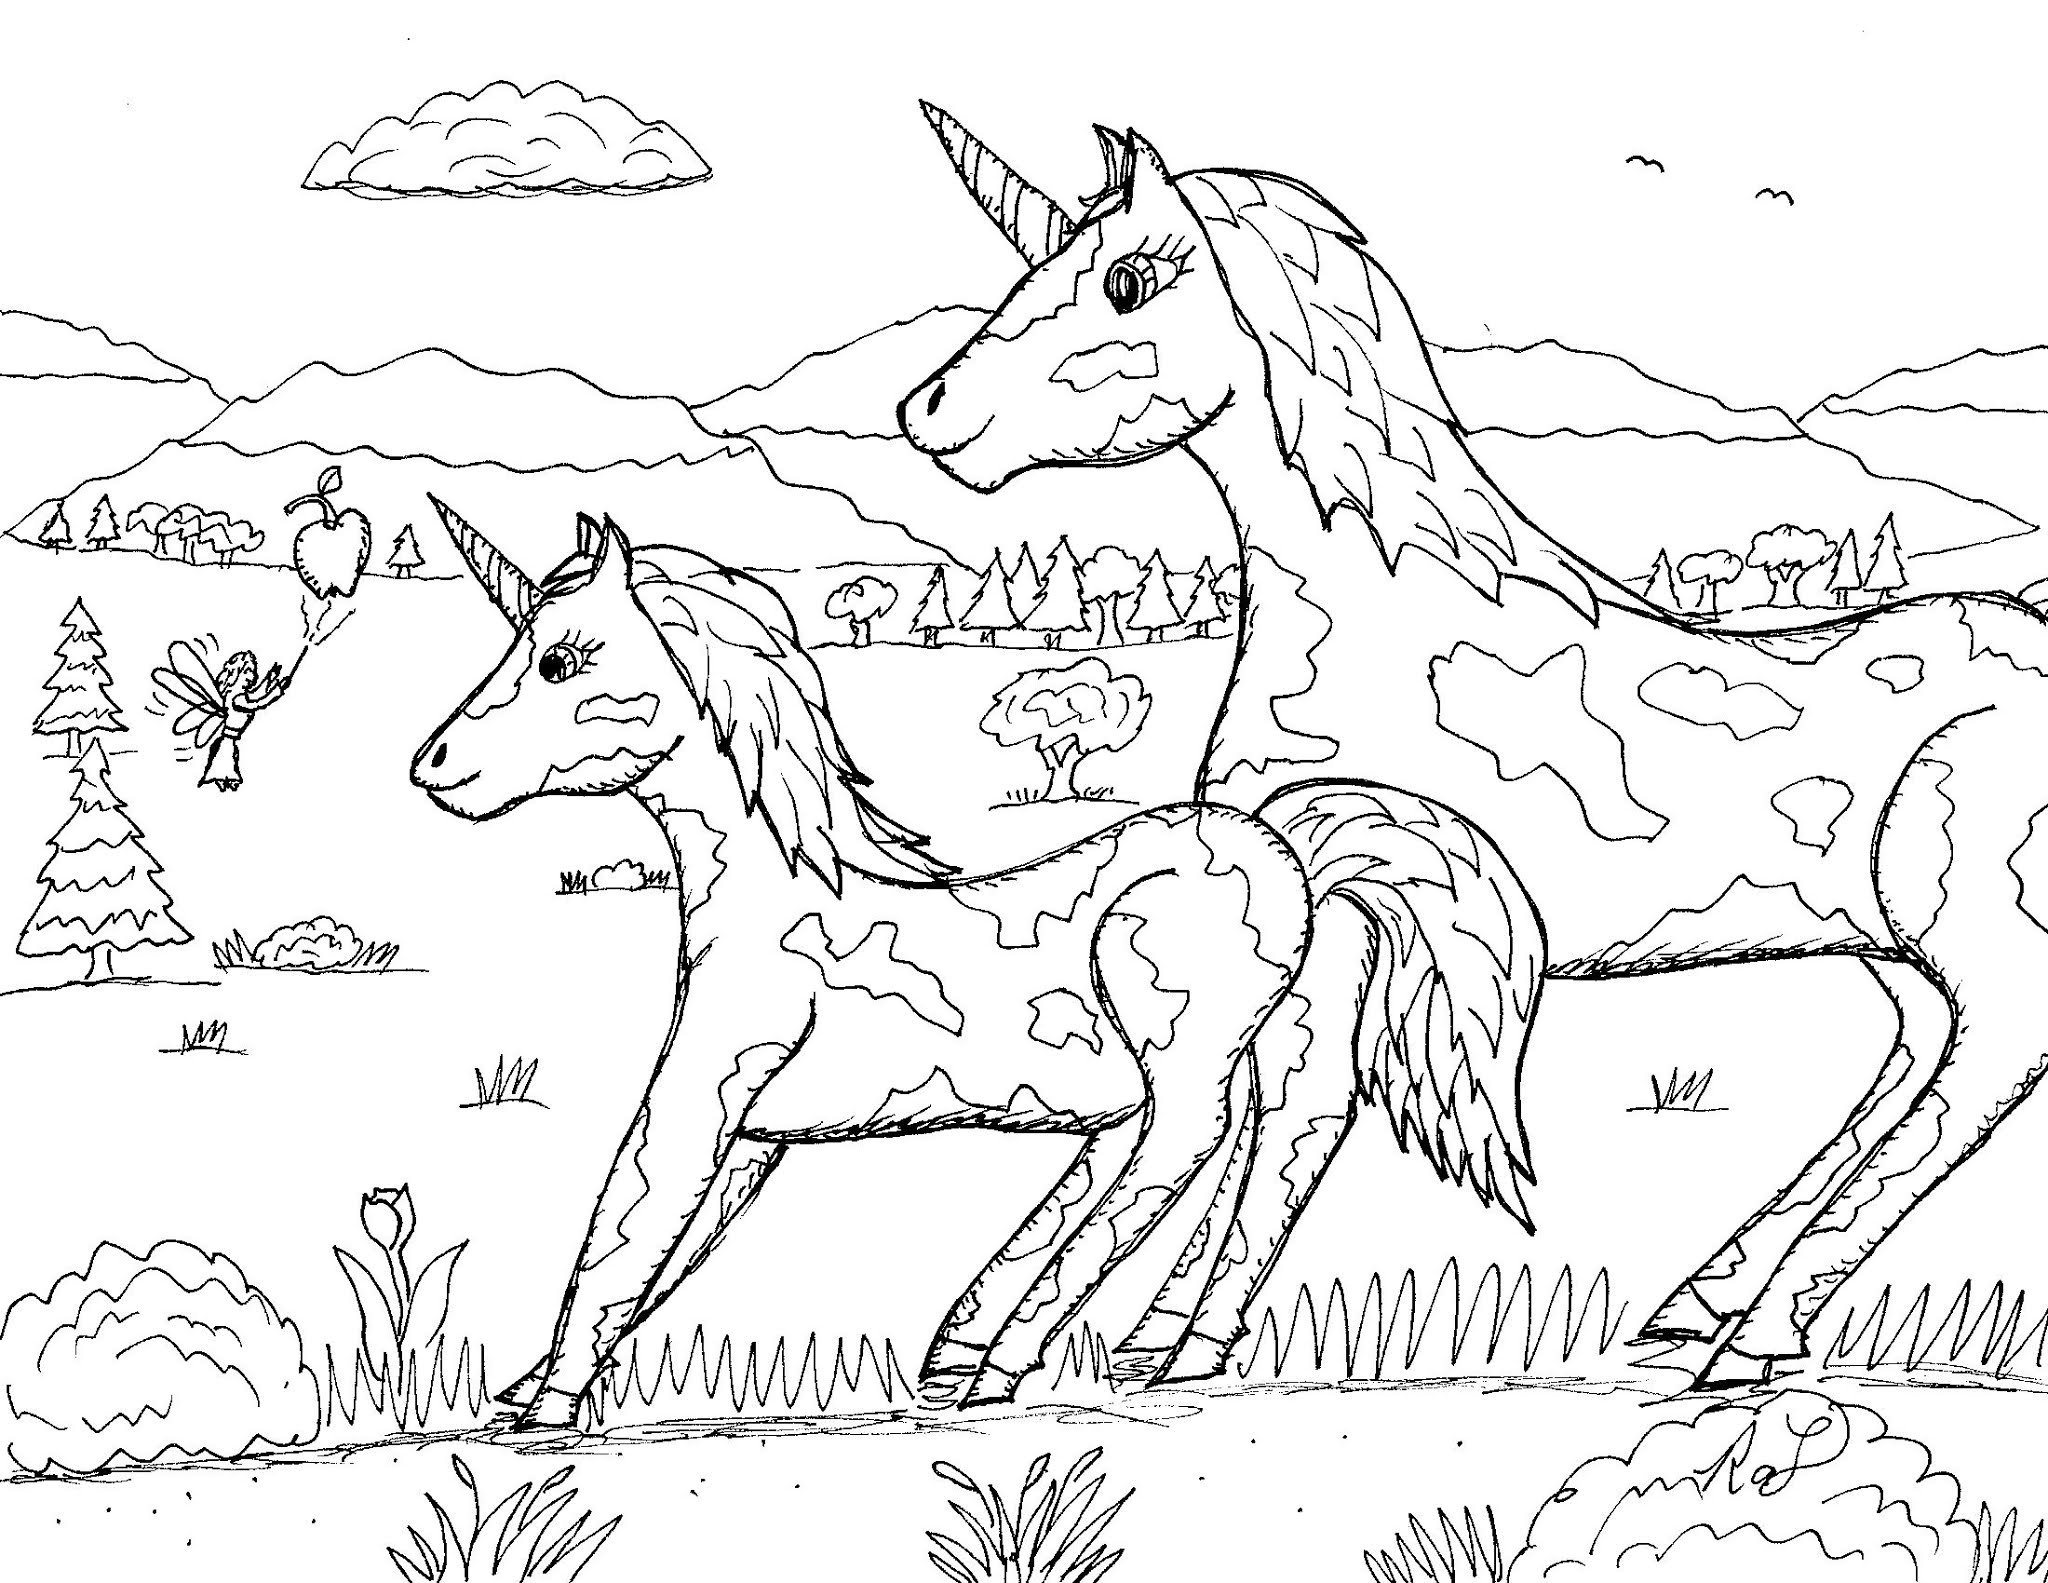 Robin's Great Coloring Pages: Unicorn with other Unicorns and with other  Magical Beings - Includes new Paint Unicorns coloring page